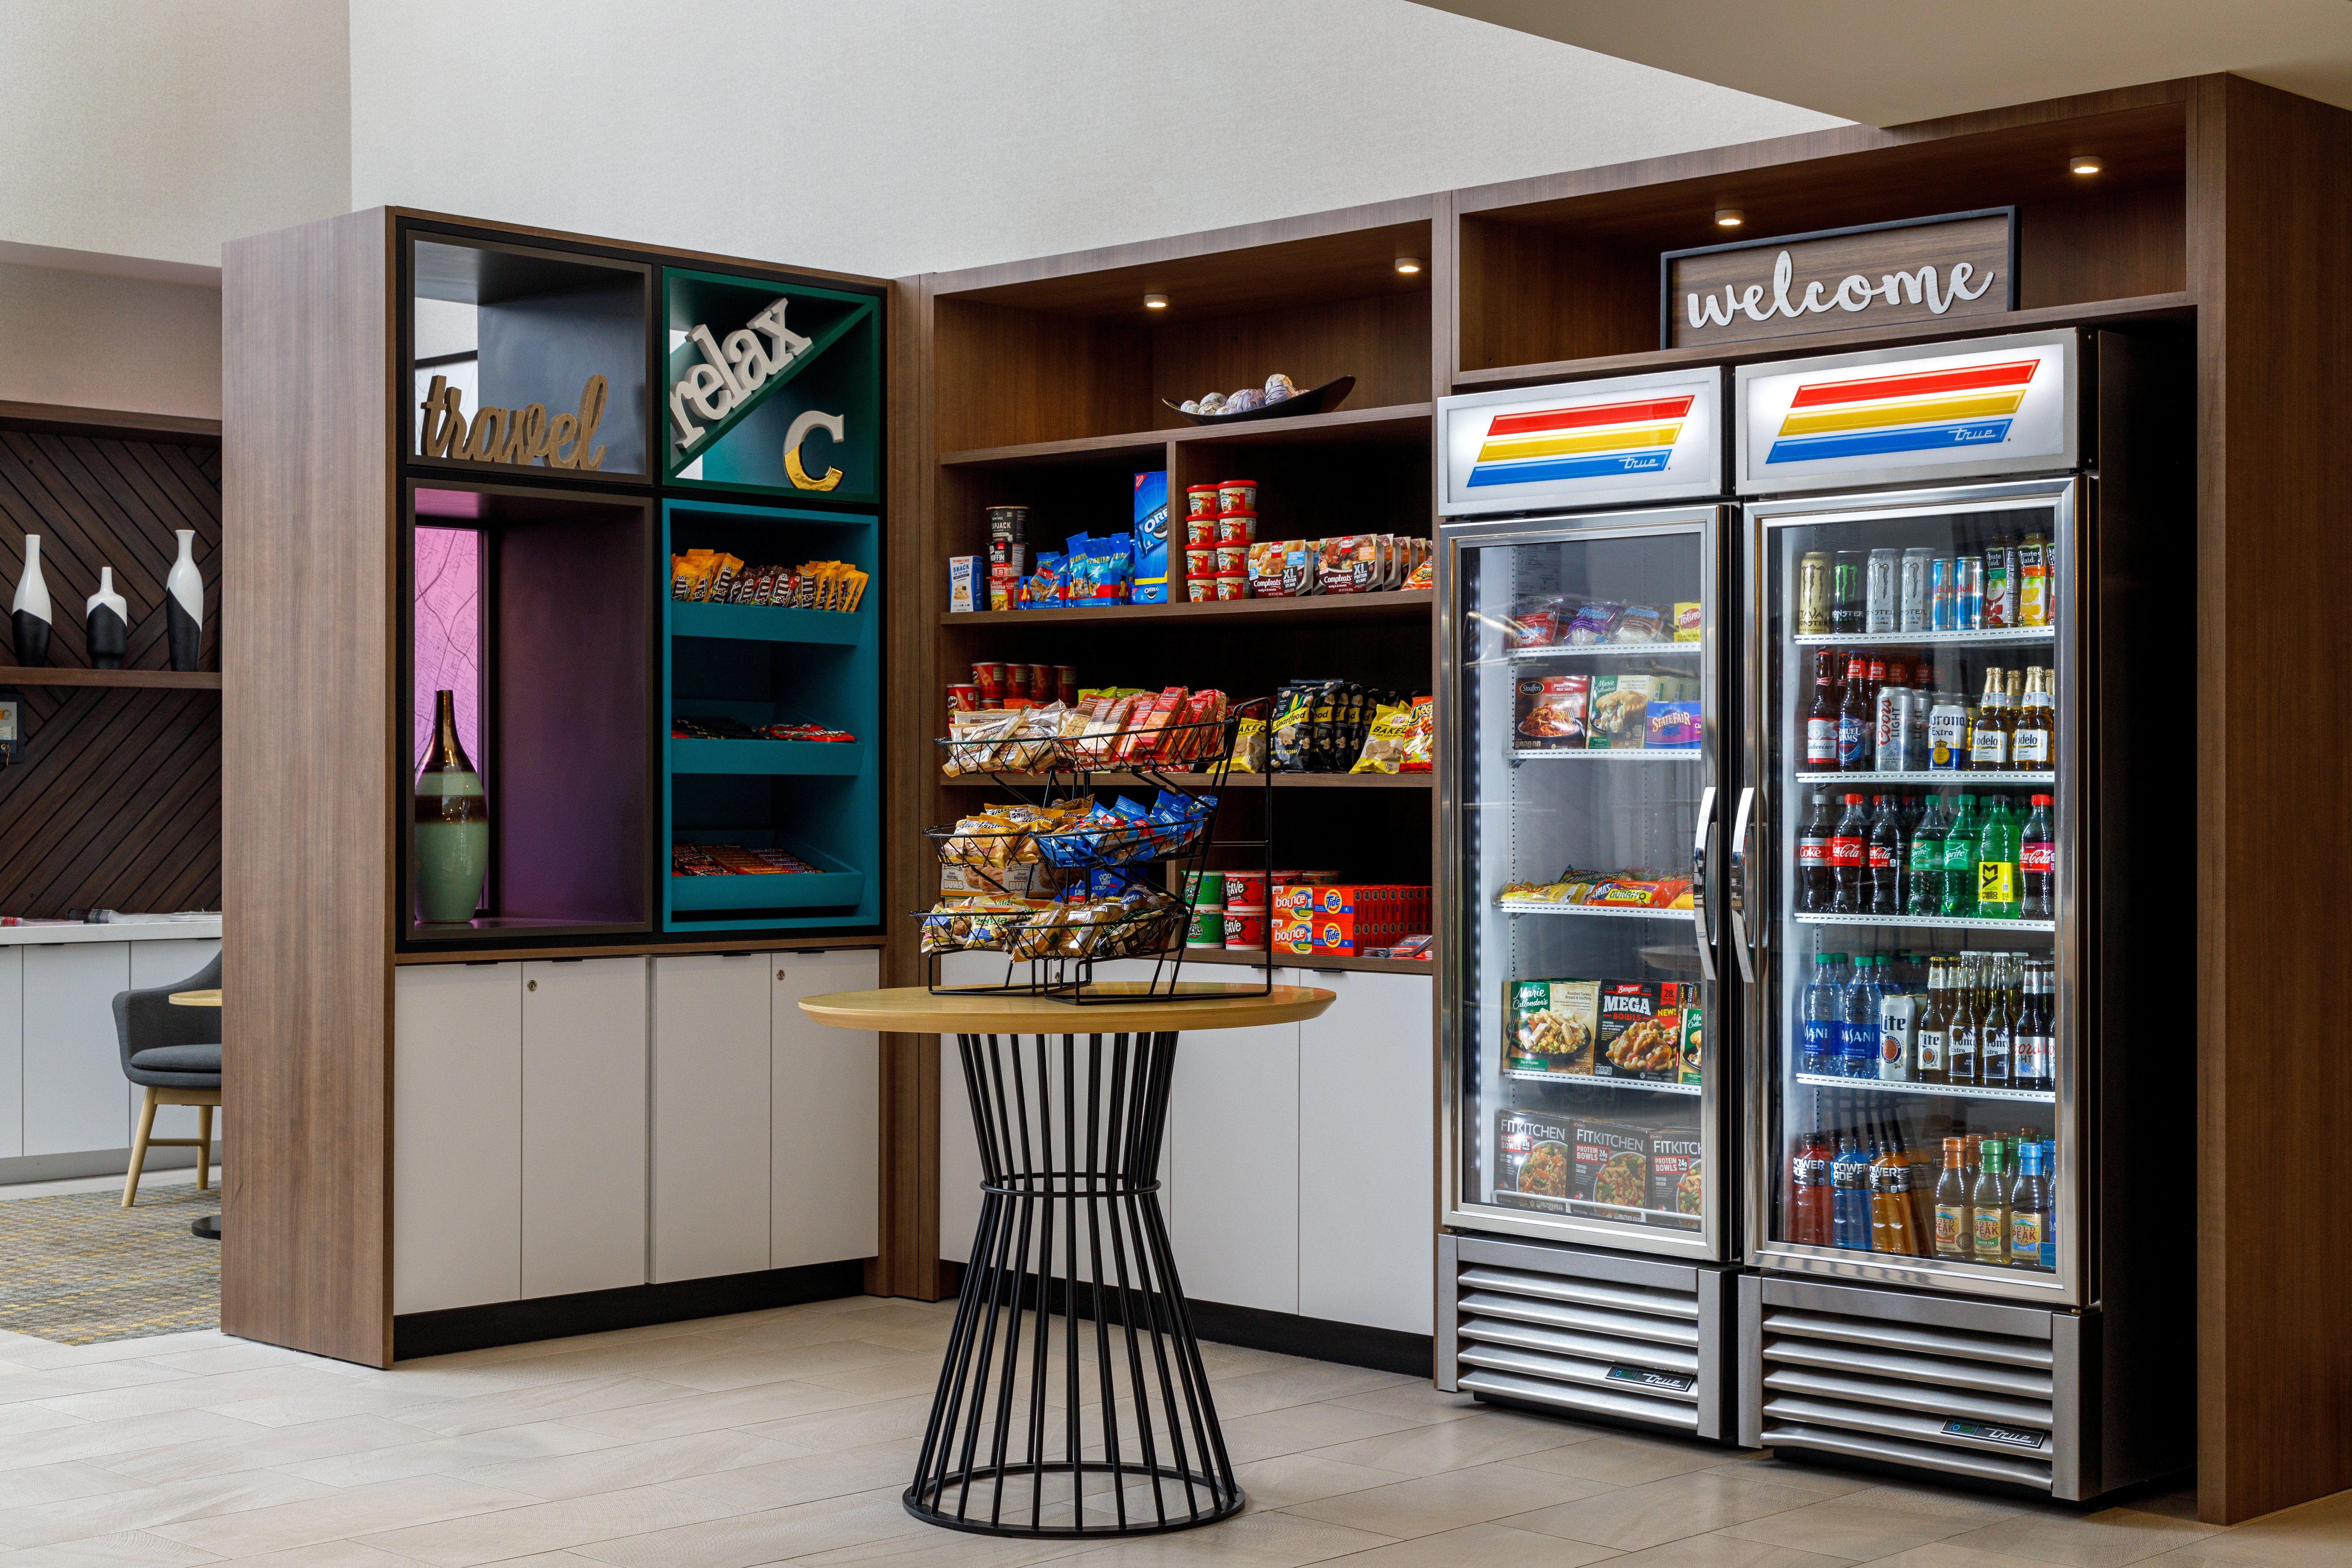 Our Gift Shop has a variety of snacks and drinks.   